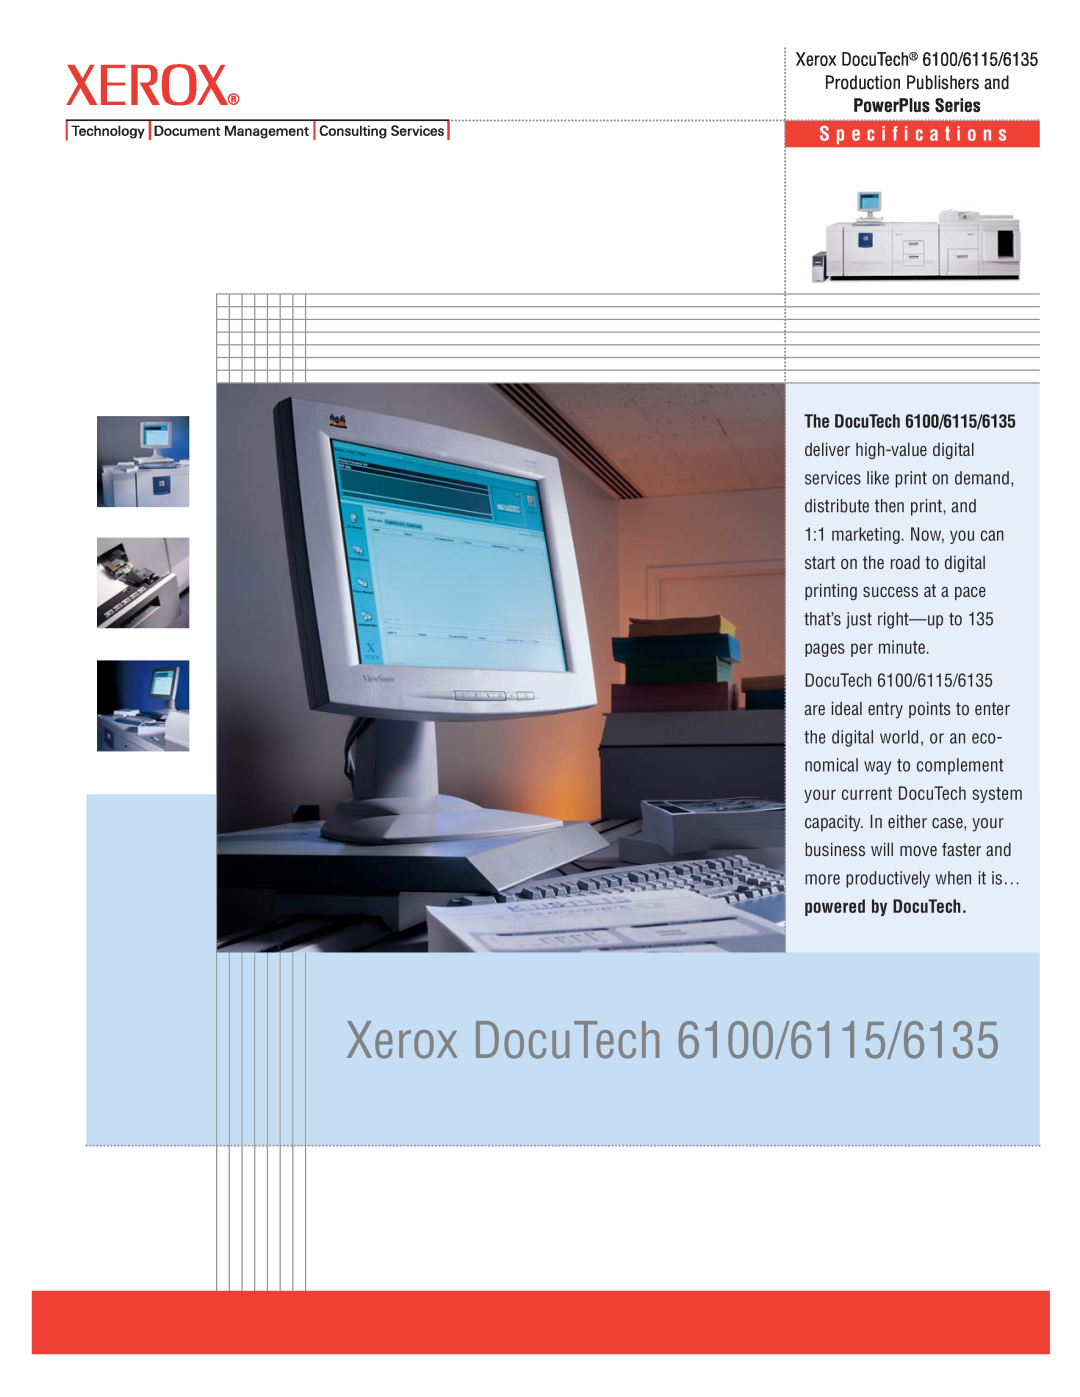 Xerox dimensions Xerox DocuTech 6100/6115/6135, Customer Support, Space Requirements, Electrical Requirements, June 